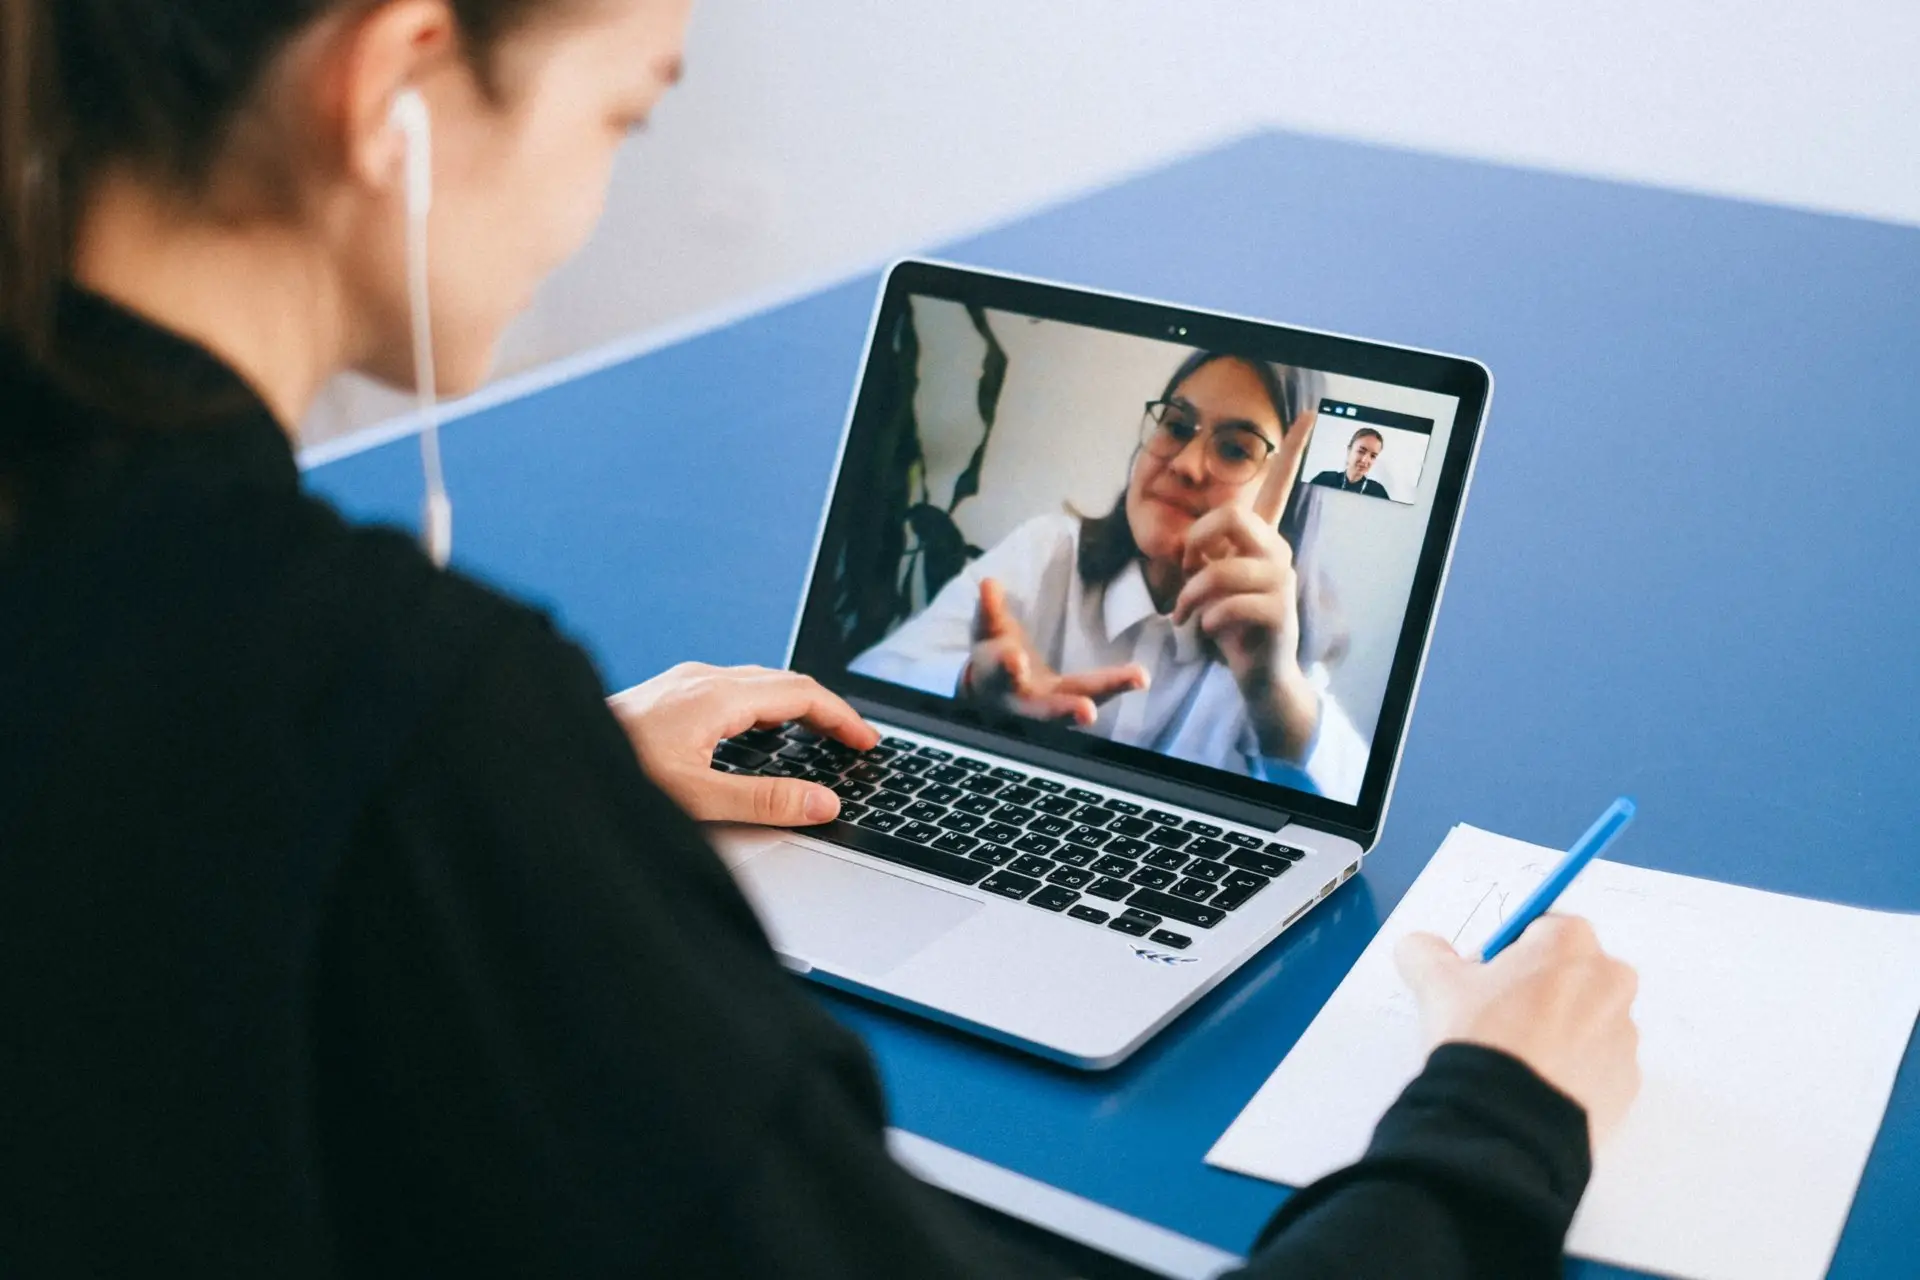 Virtual events: Acing your online interview